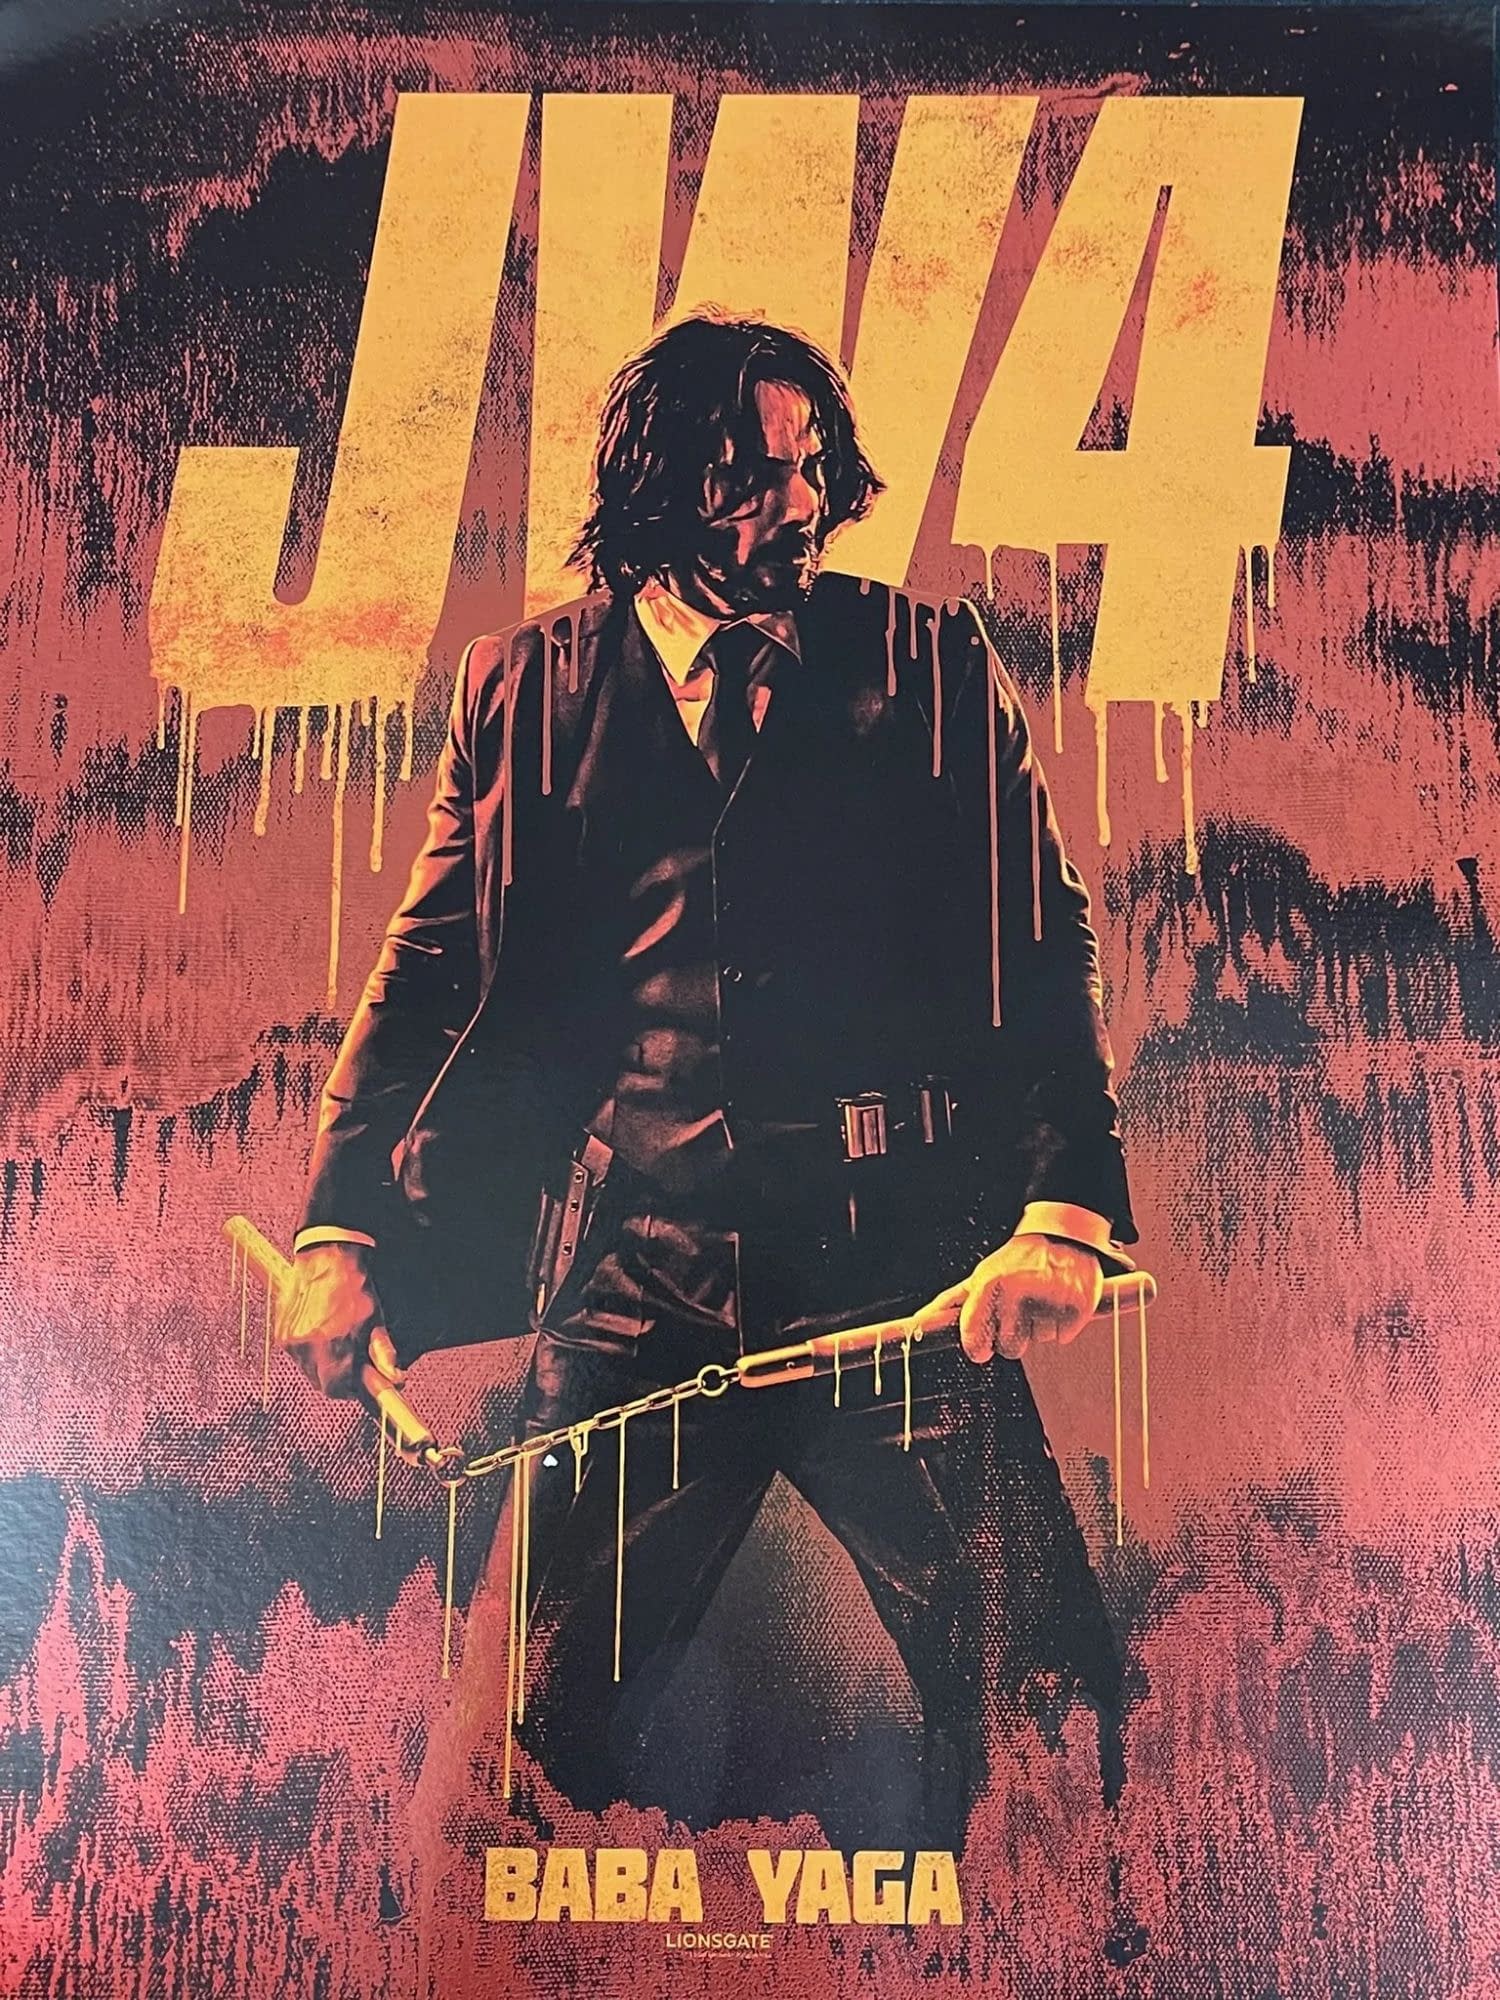 ‘John Wick: Chapter 4’ Trailer Debuts At Comic-Con, Keanu Reeves Battles Donnie Yen